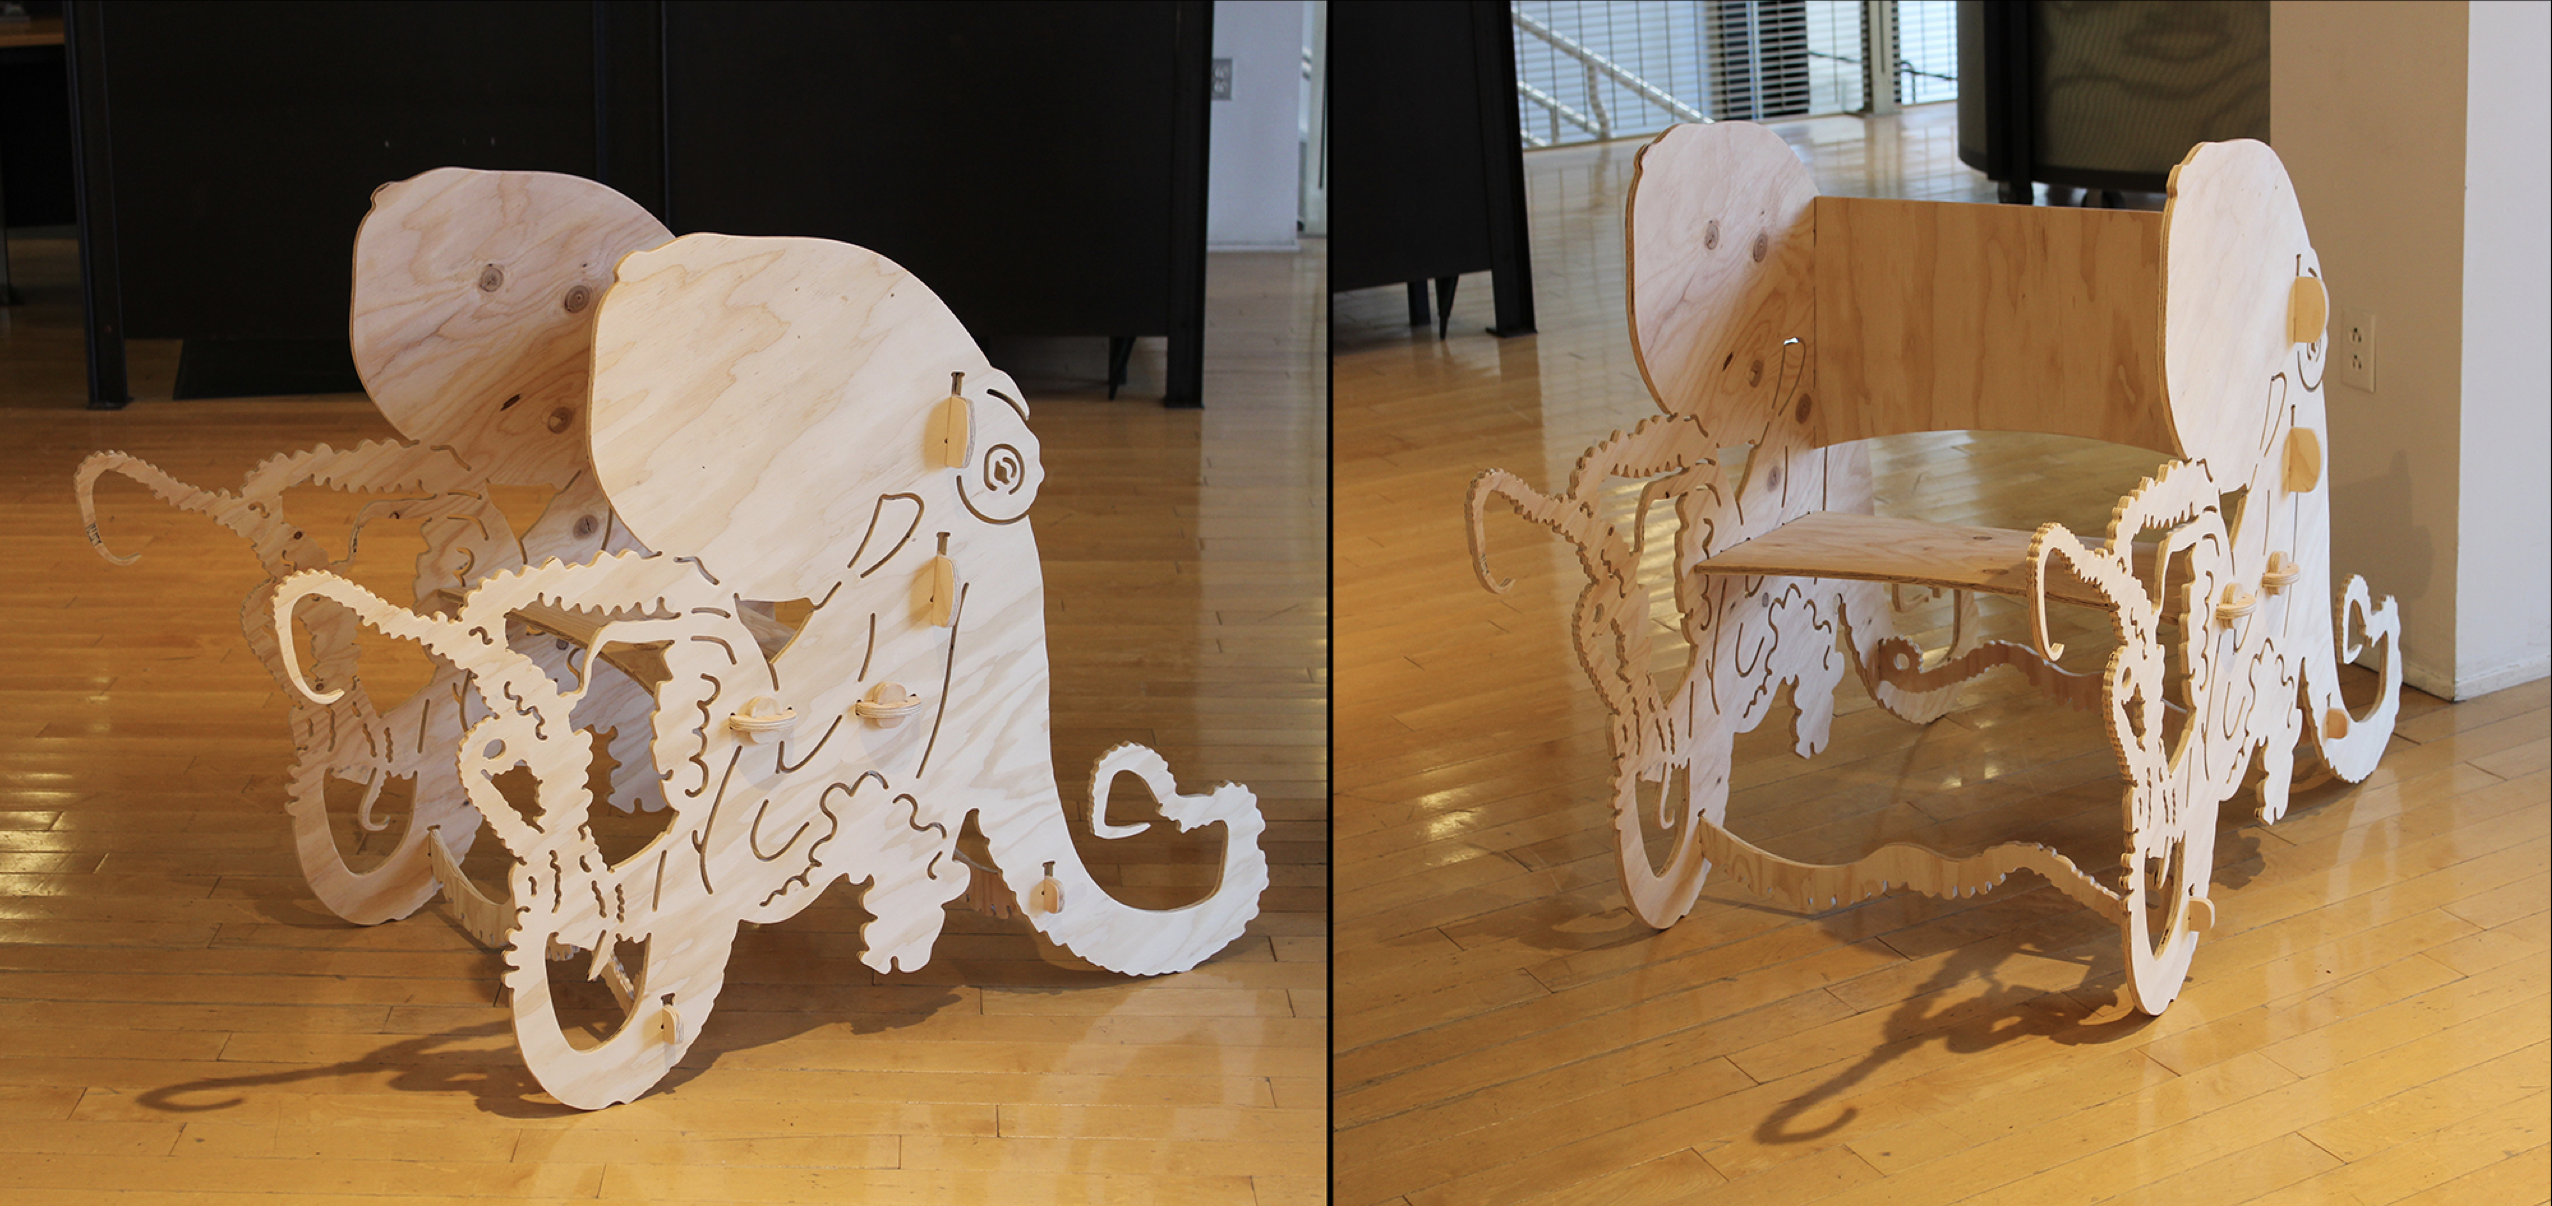 Hailey Angione “Octopus Chair”